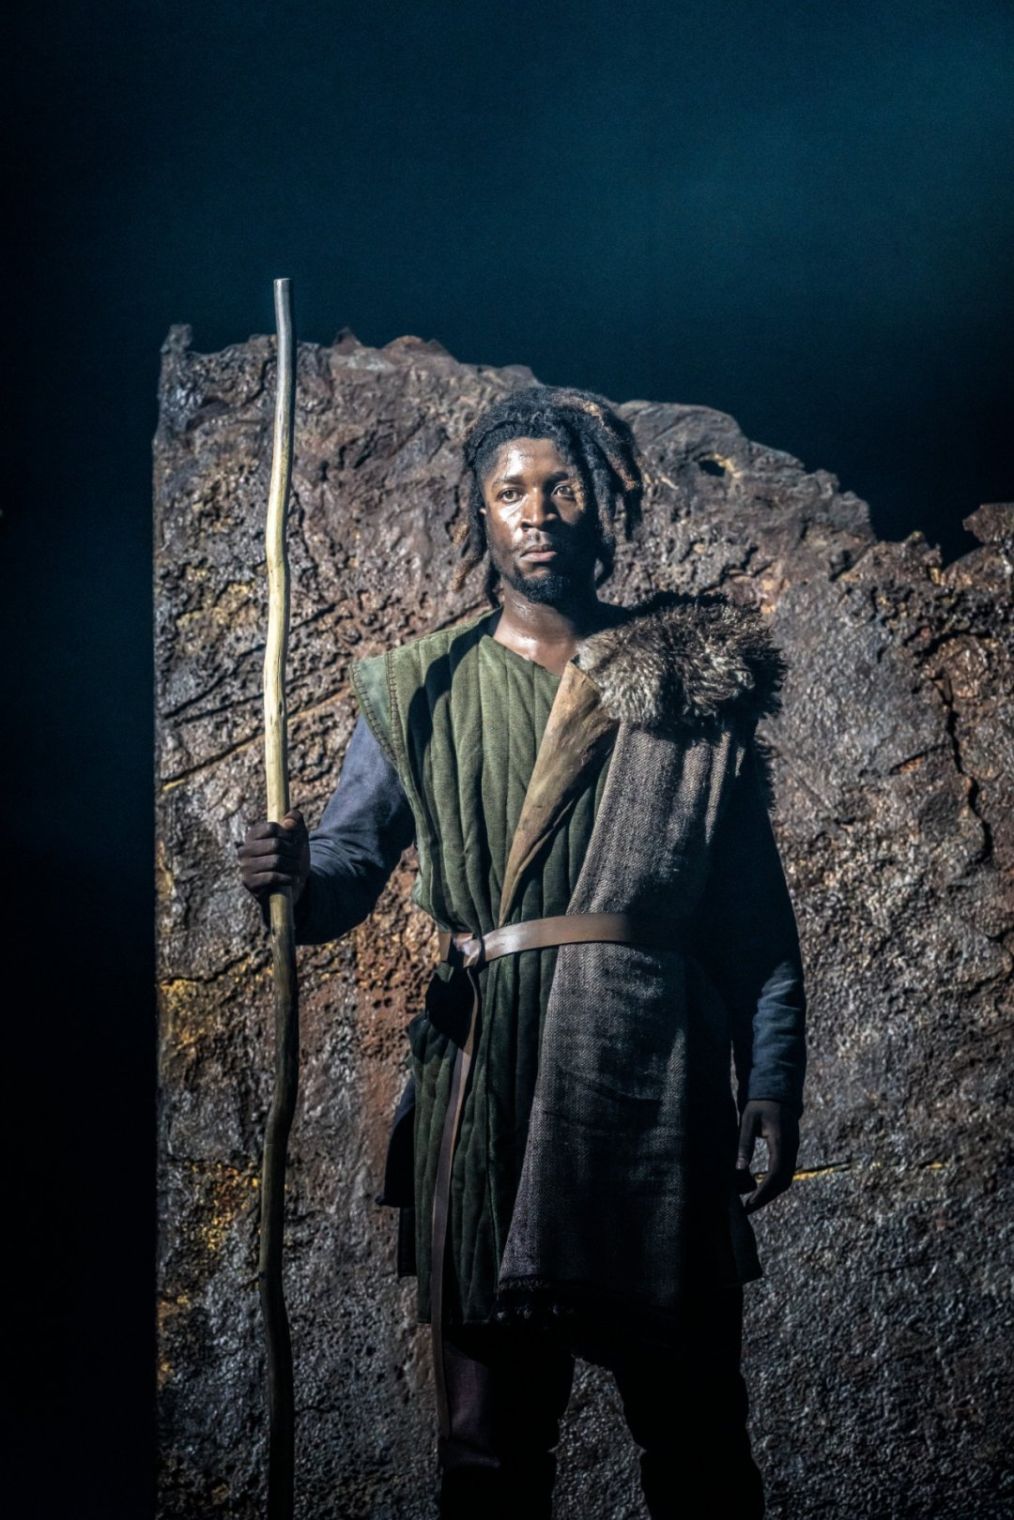 See Caleb Obediah in a brand new West End production of King Lear, starring and directed by Kenneth Branagh